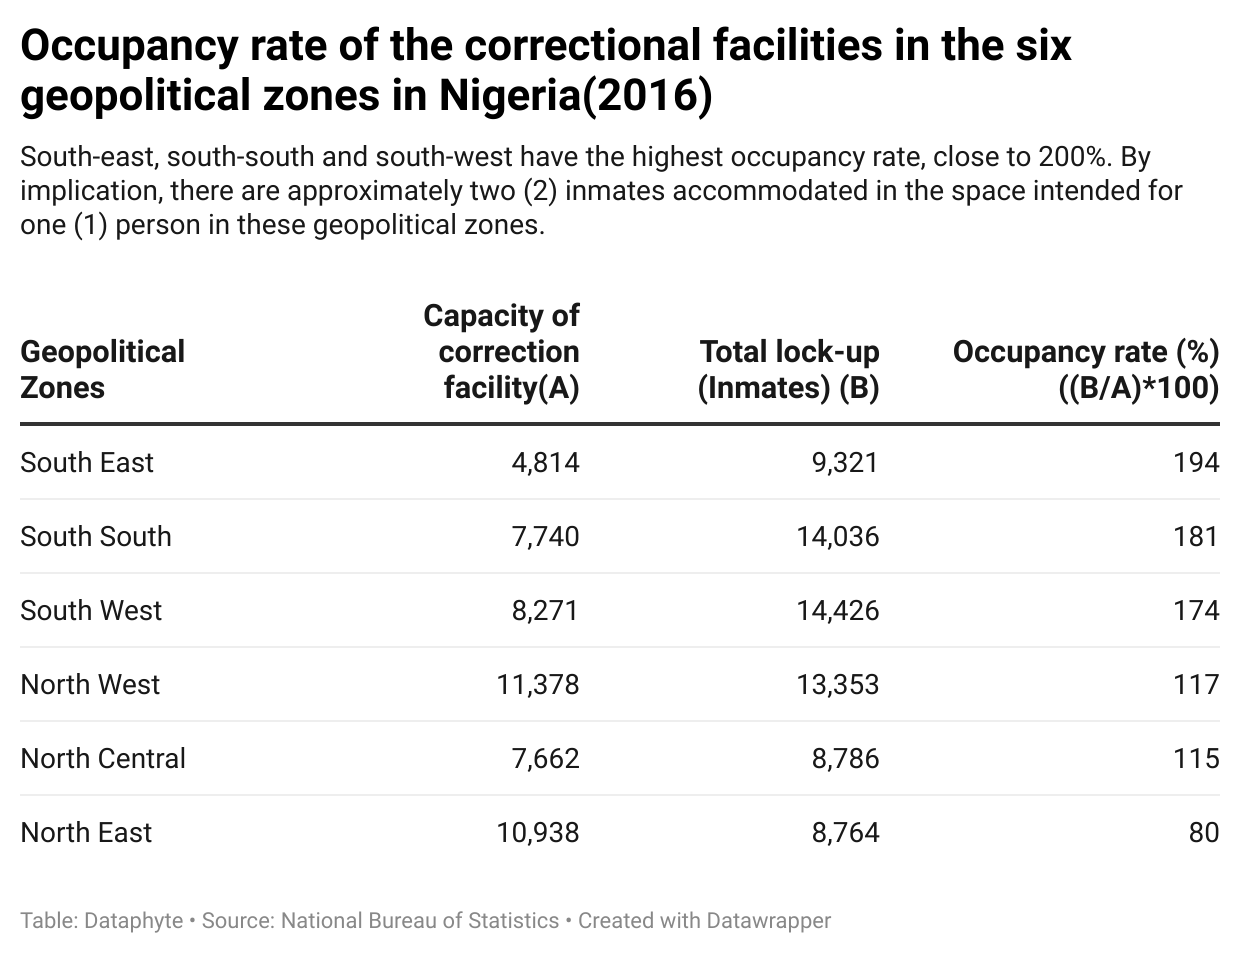 Occupancy rate of correctional centres in the six geopolitical zones of Nigeria